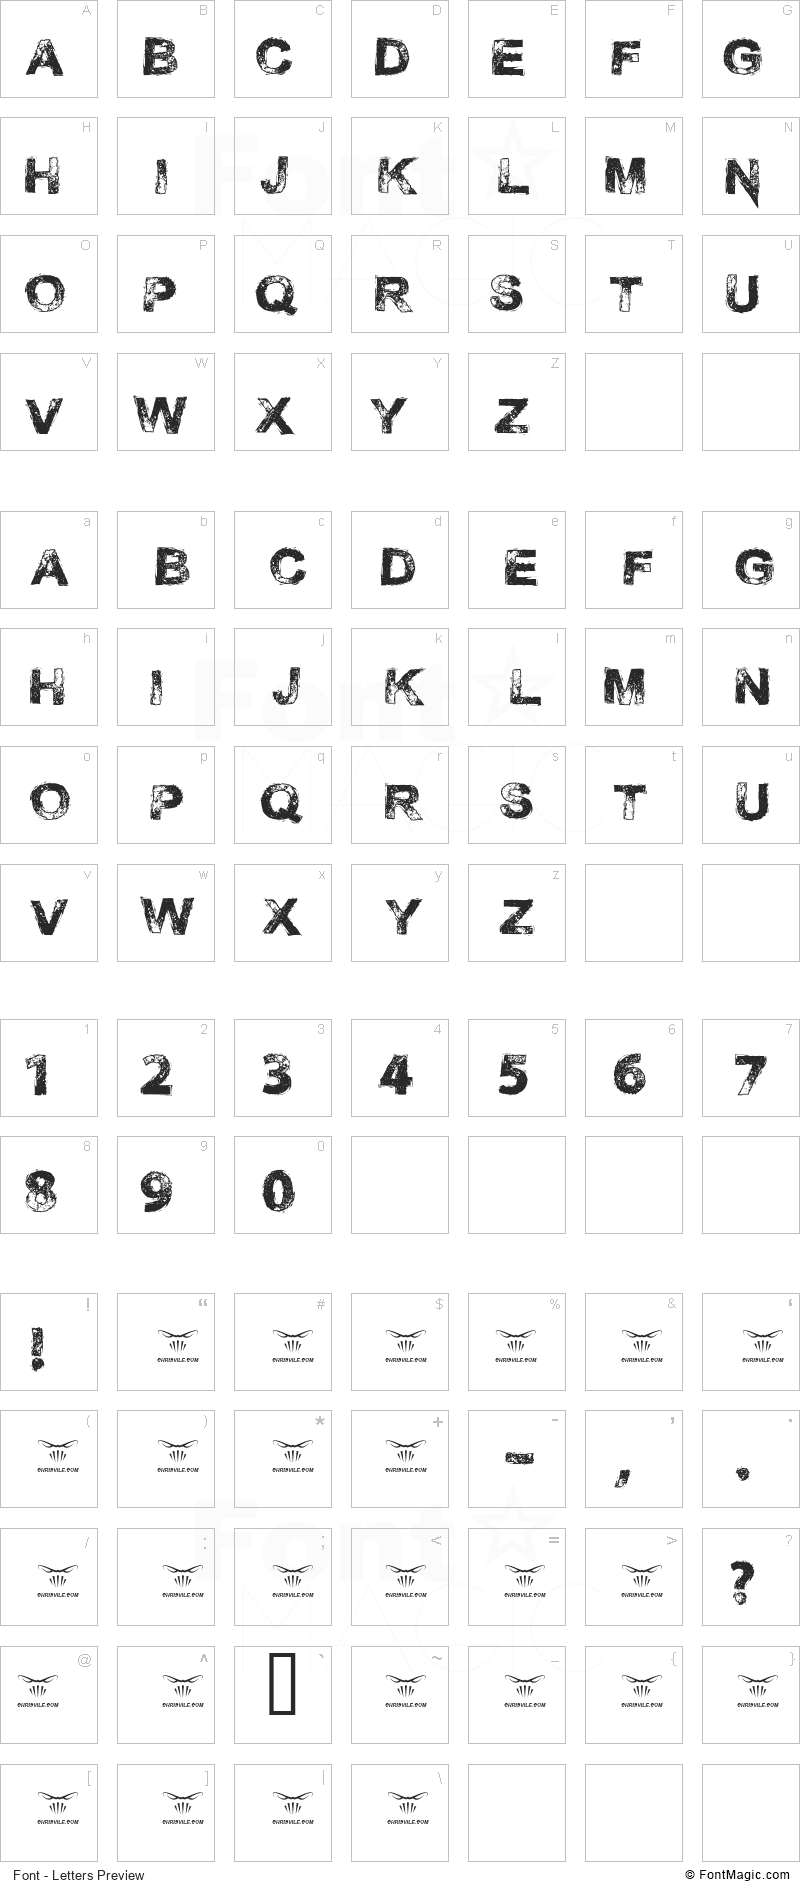 Necrotype Font - All Latters Preview Chart